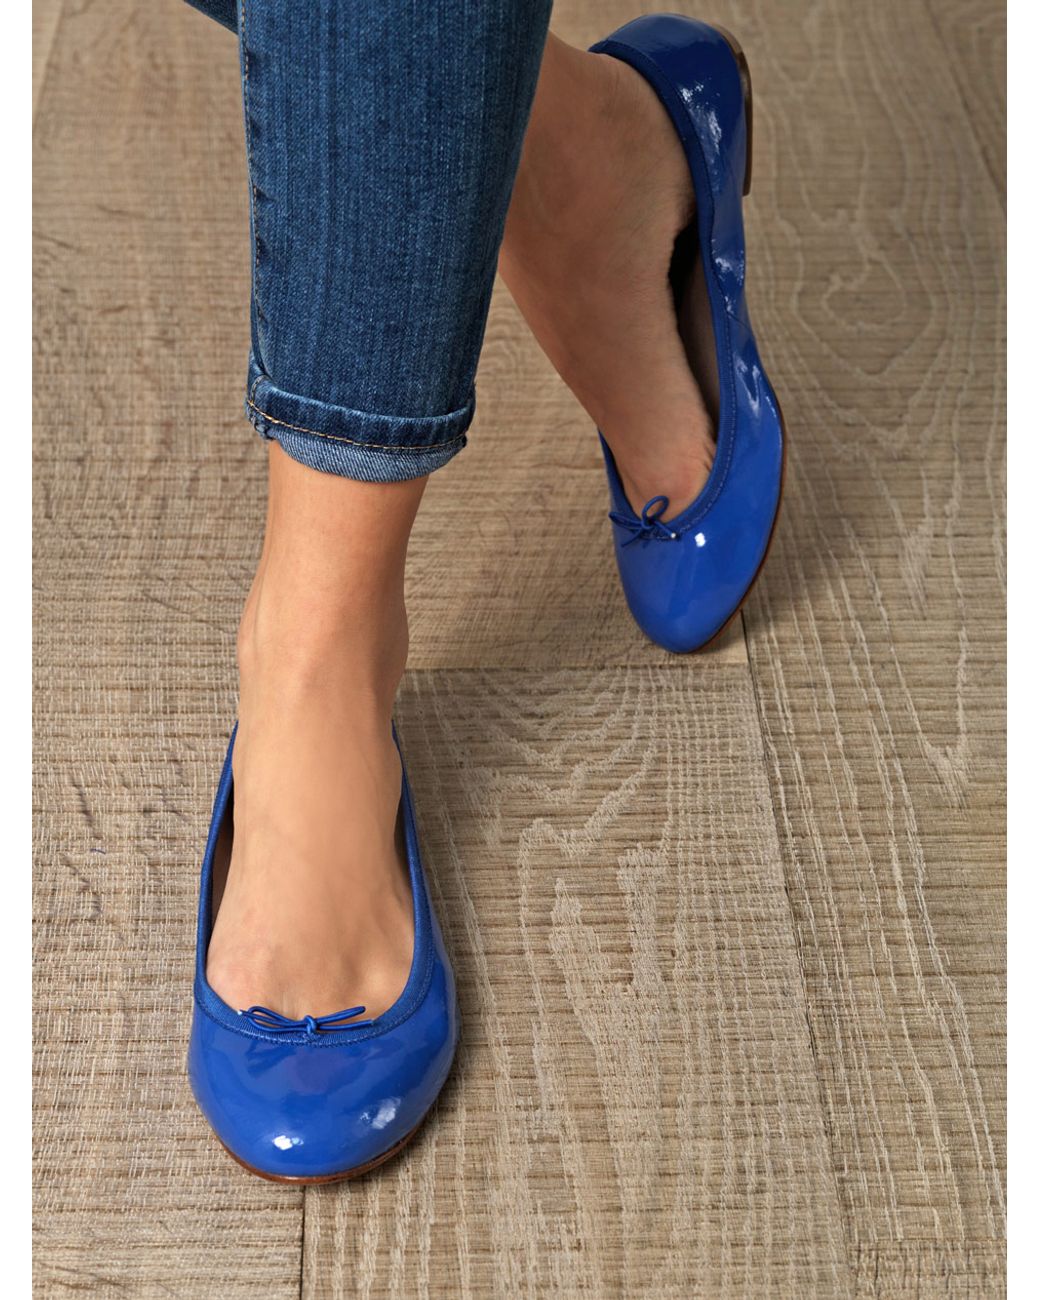 Bloch Patent Leather Flats in Blue